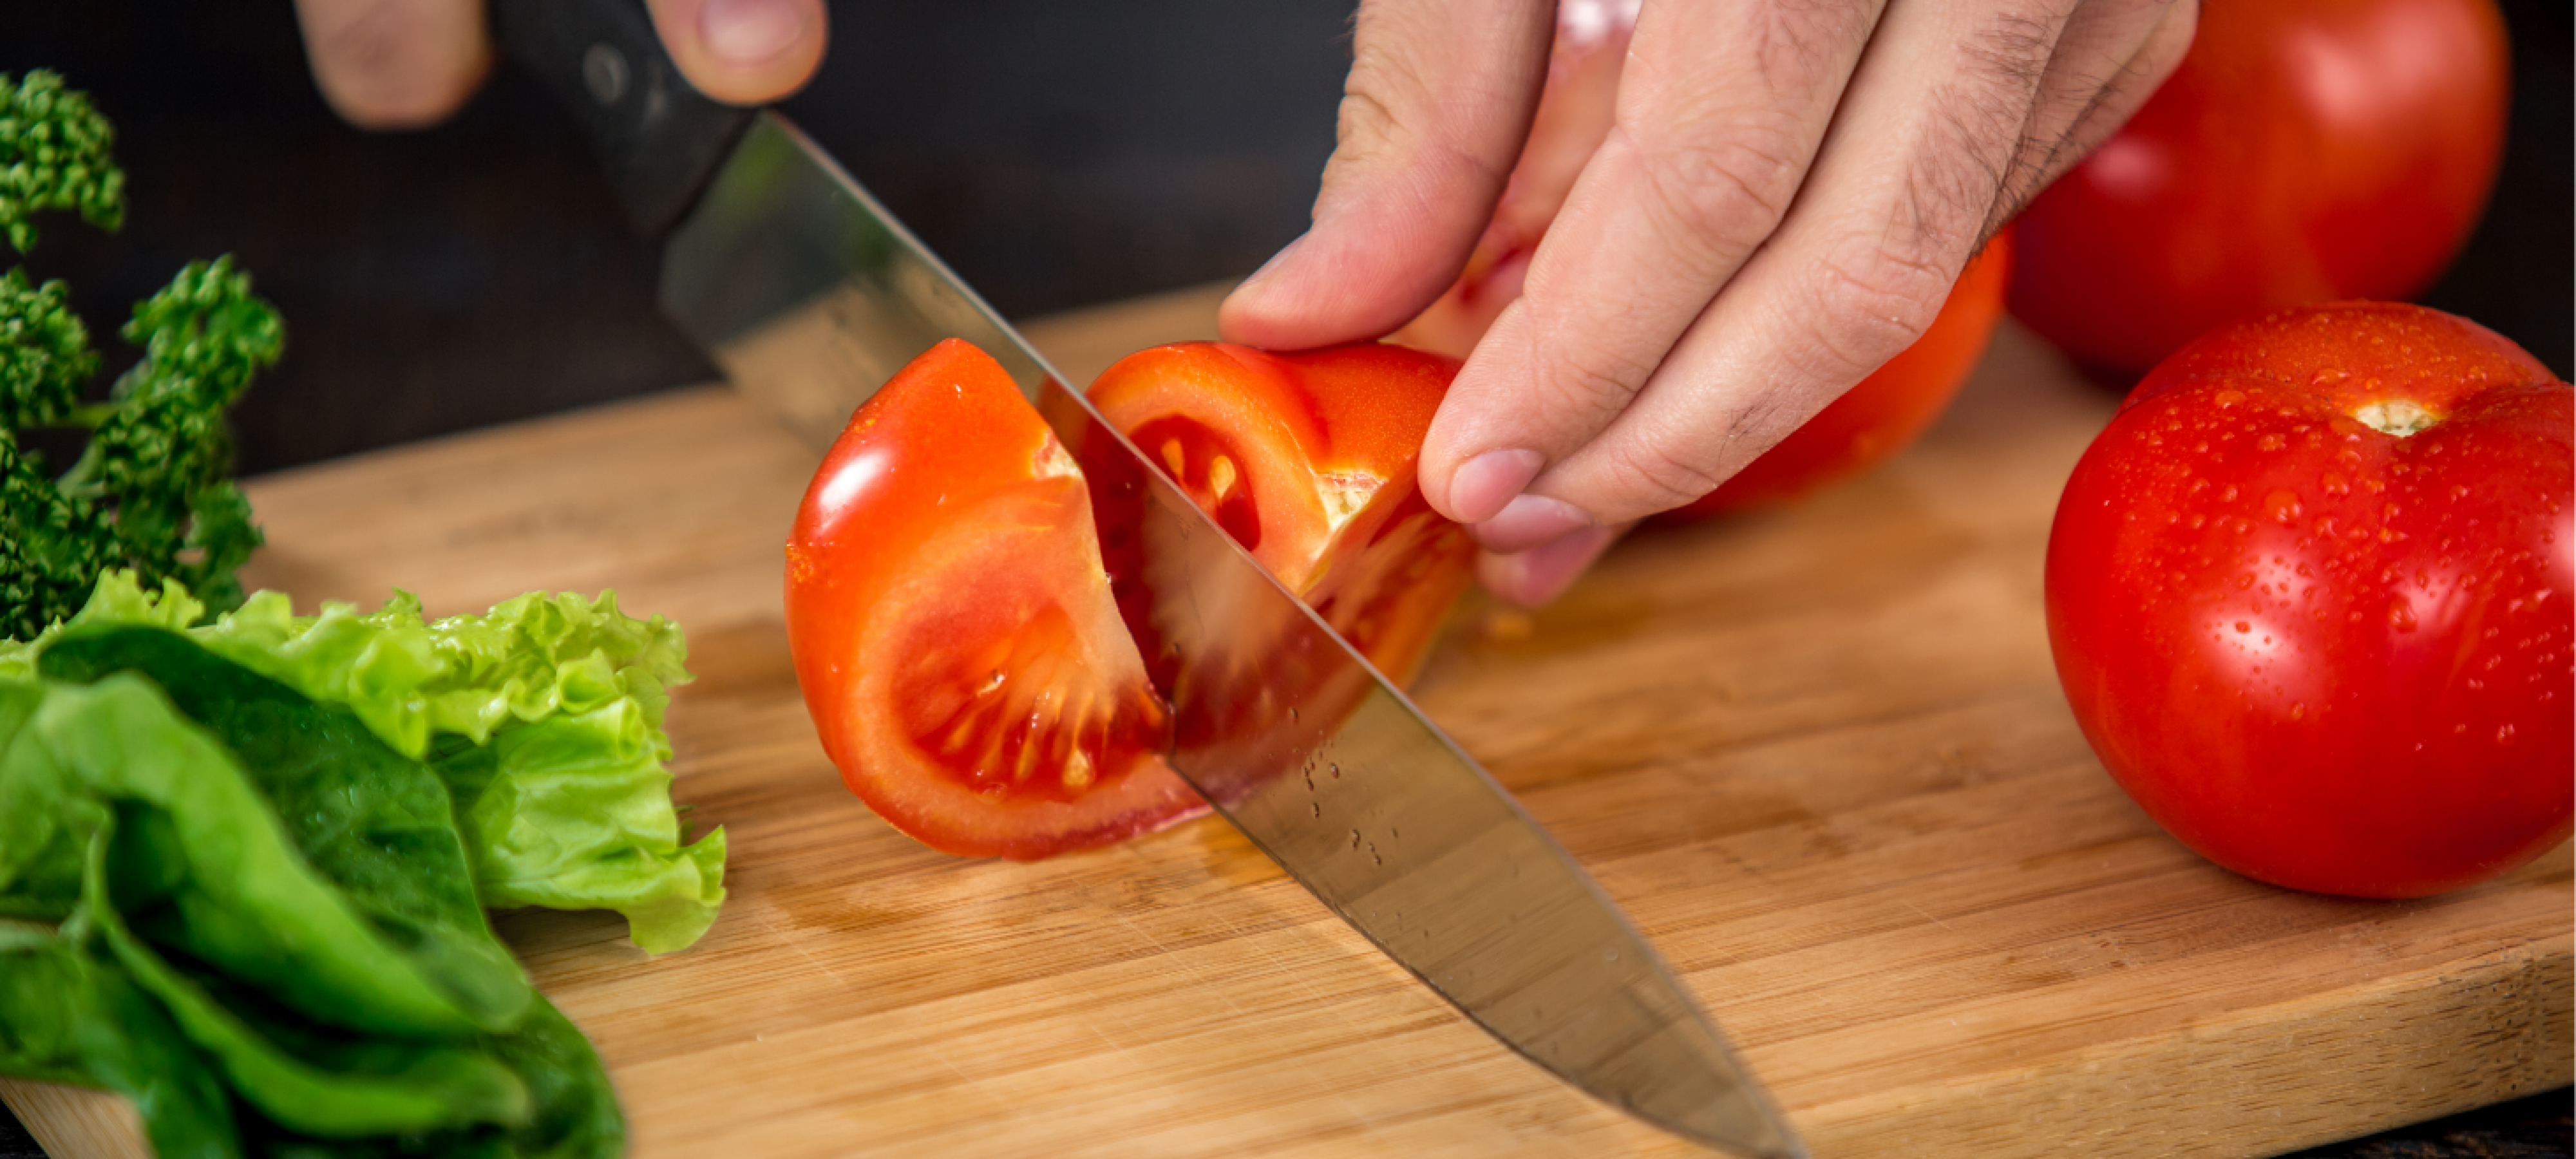 Best Knife to Cut Tomatoes Without Creating a Mess in Your Kitchen